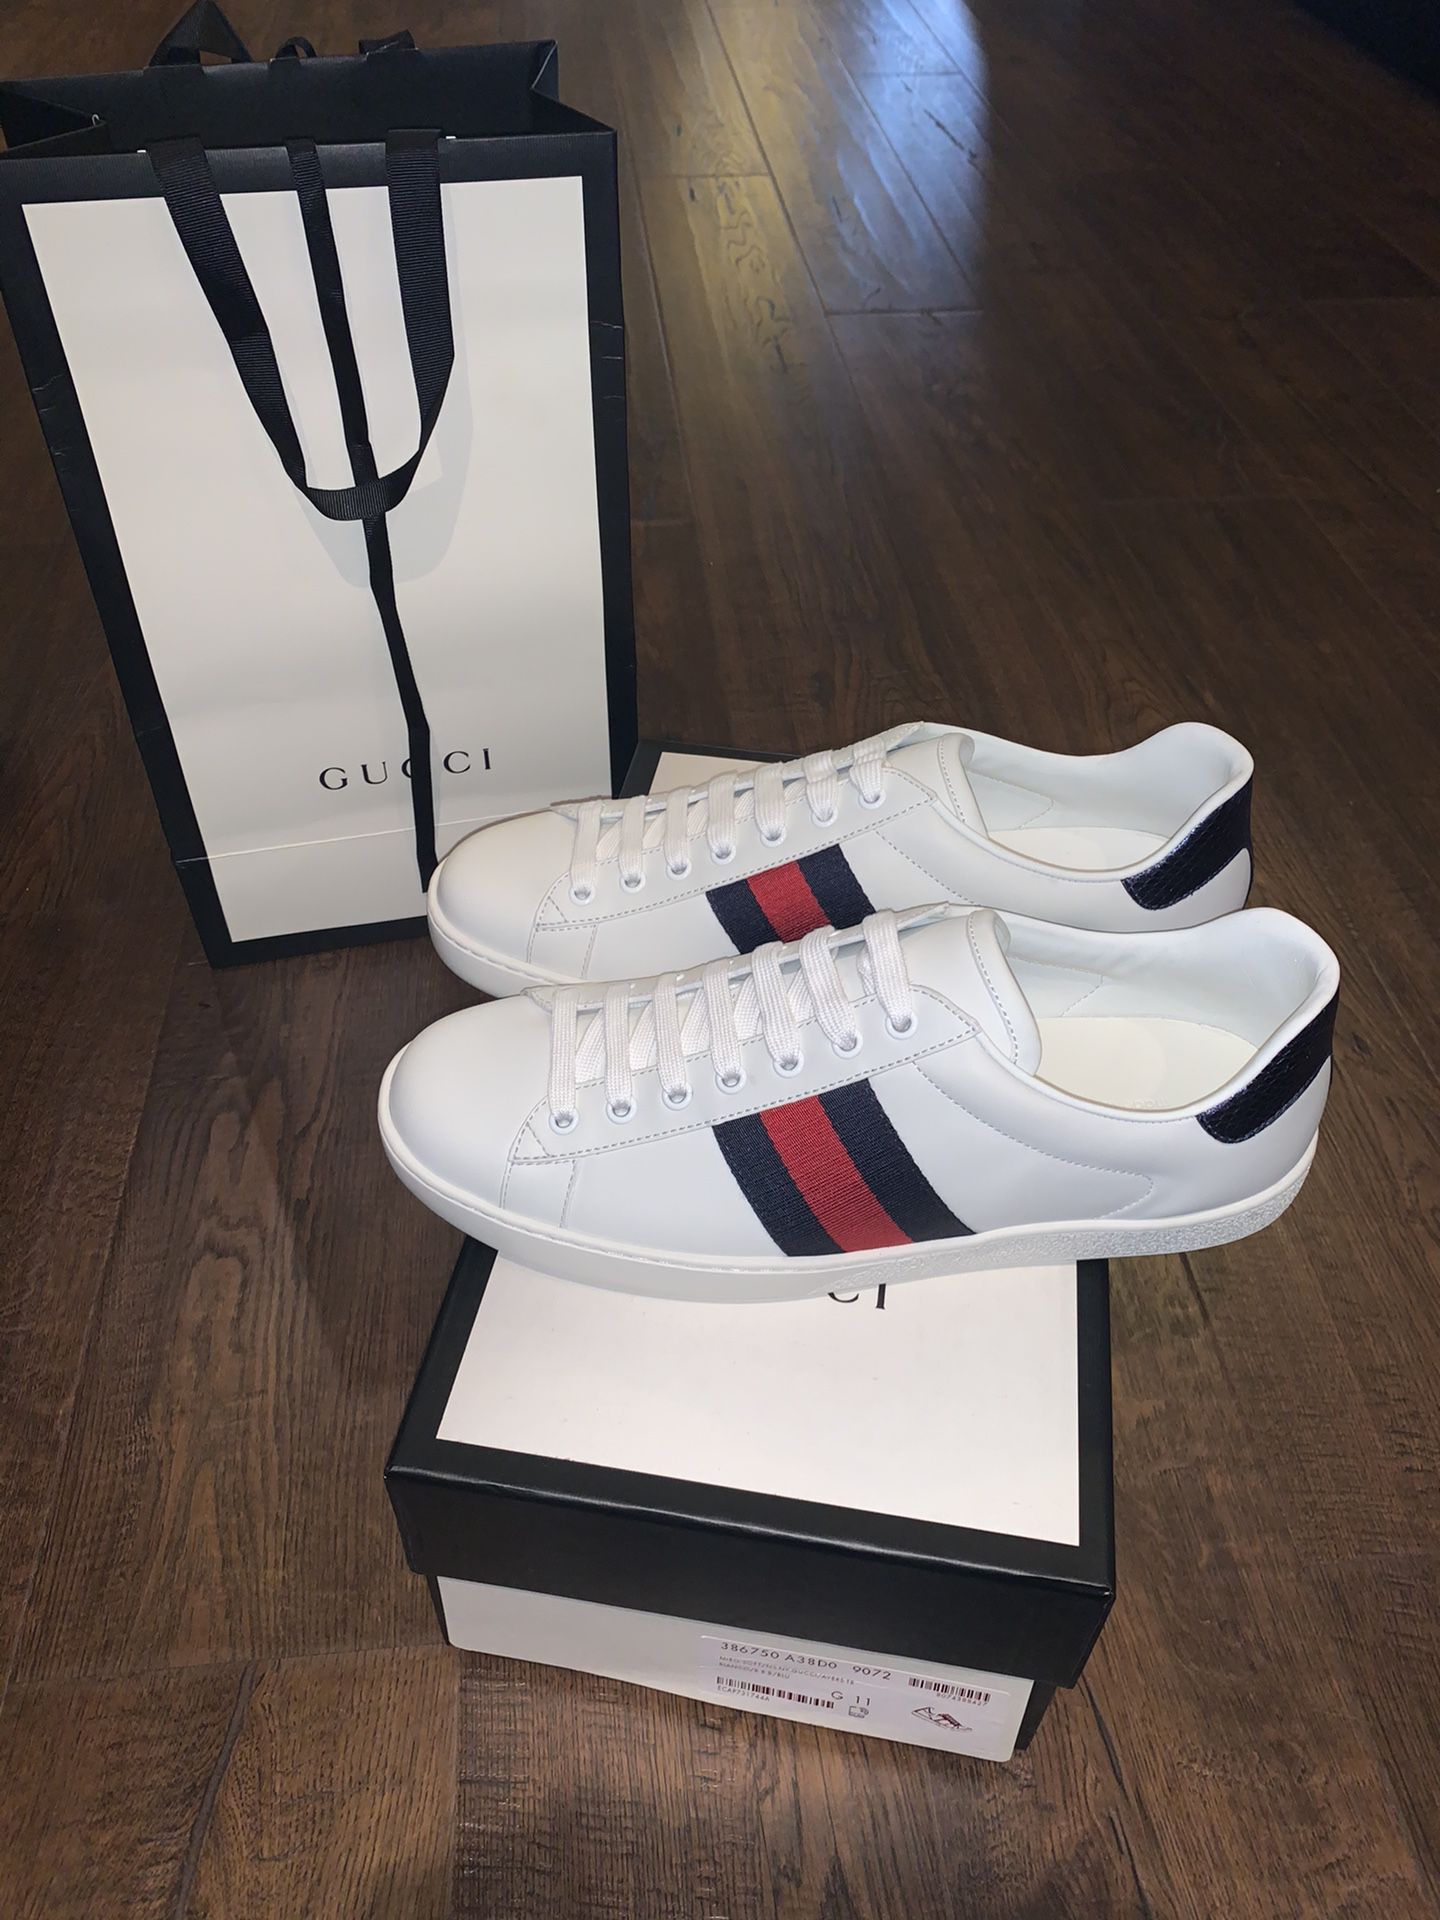 BRAND NEW Men’s Gucci Ace White Leather Size US 12